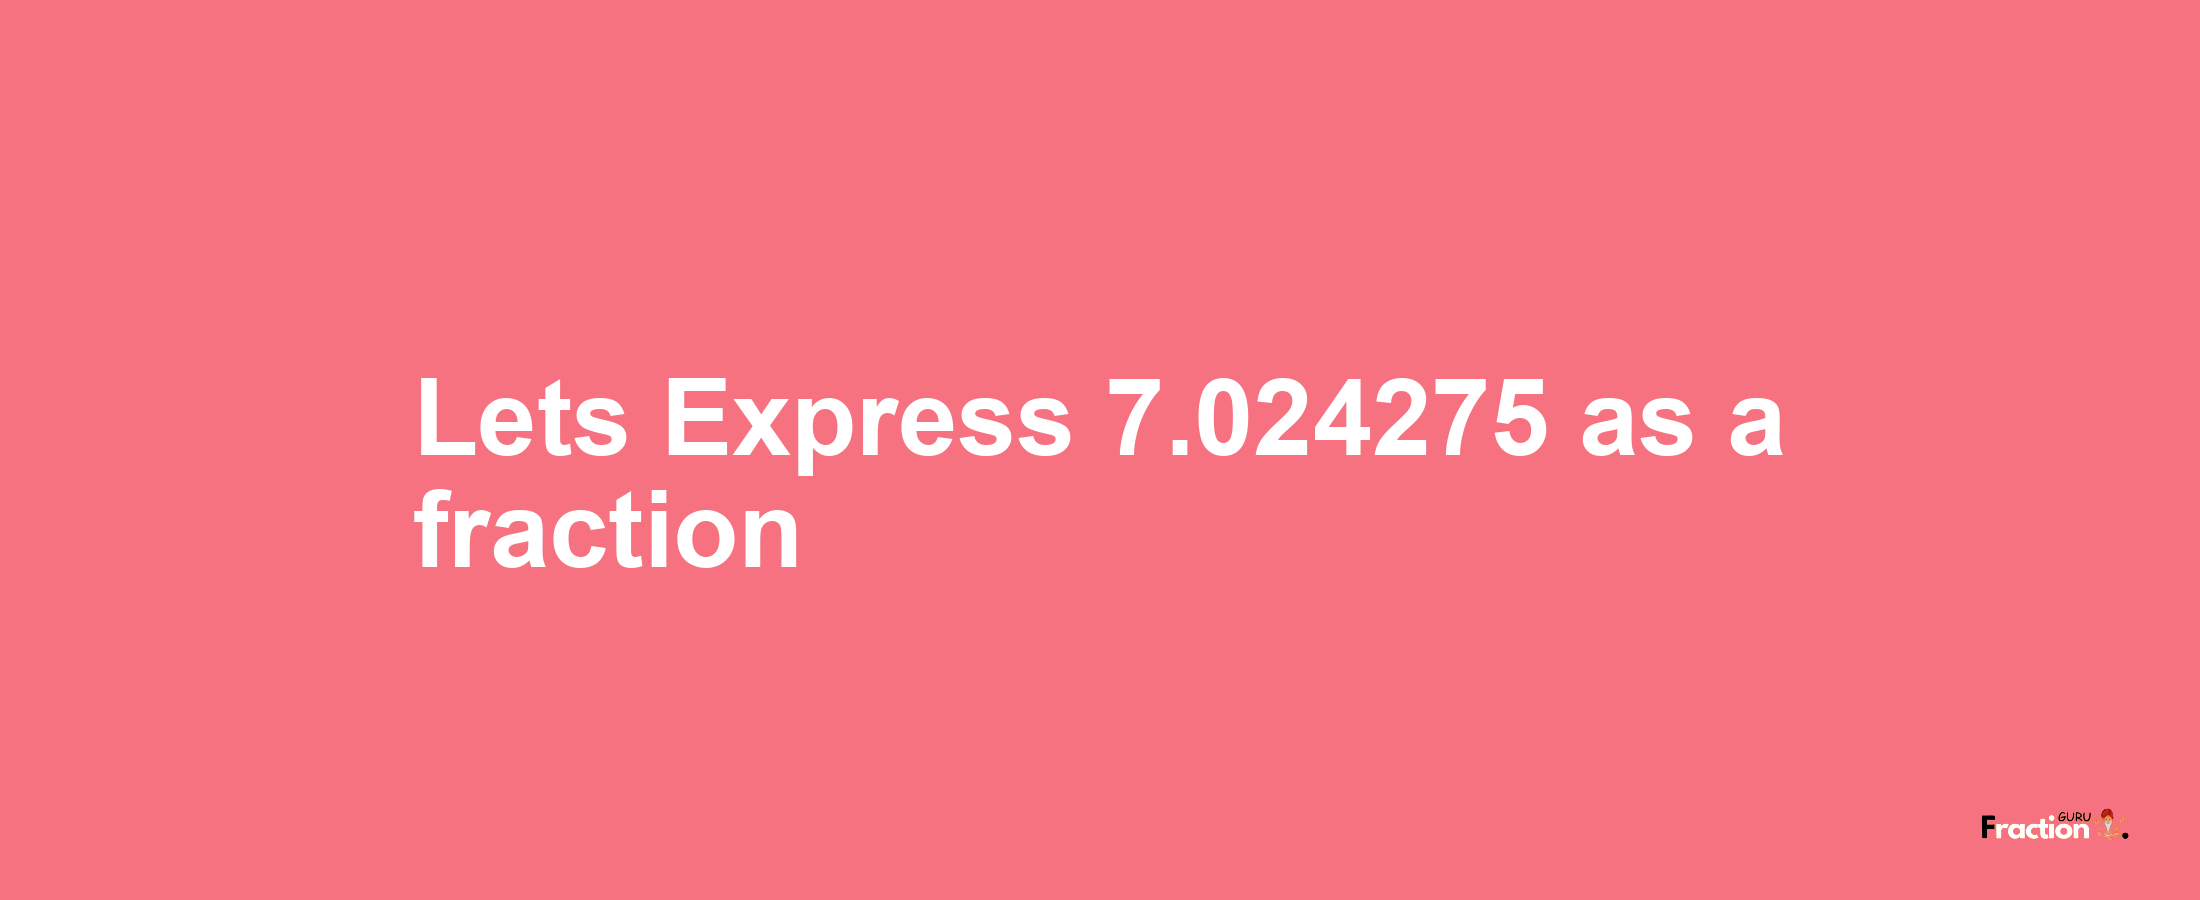 Lets Express 7.024275 as afraction